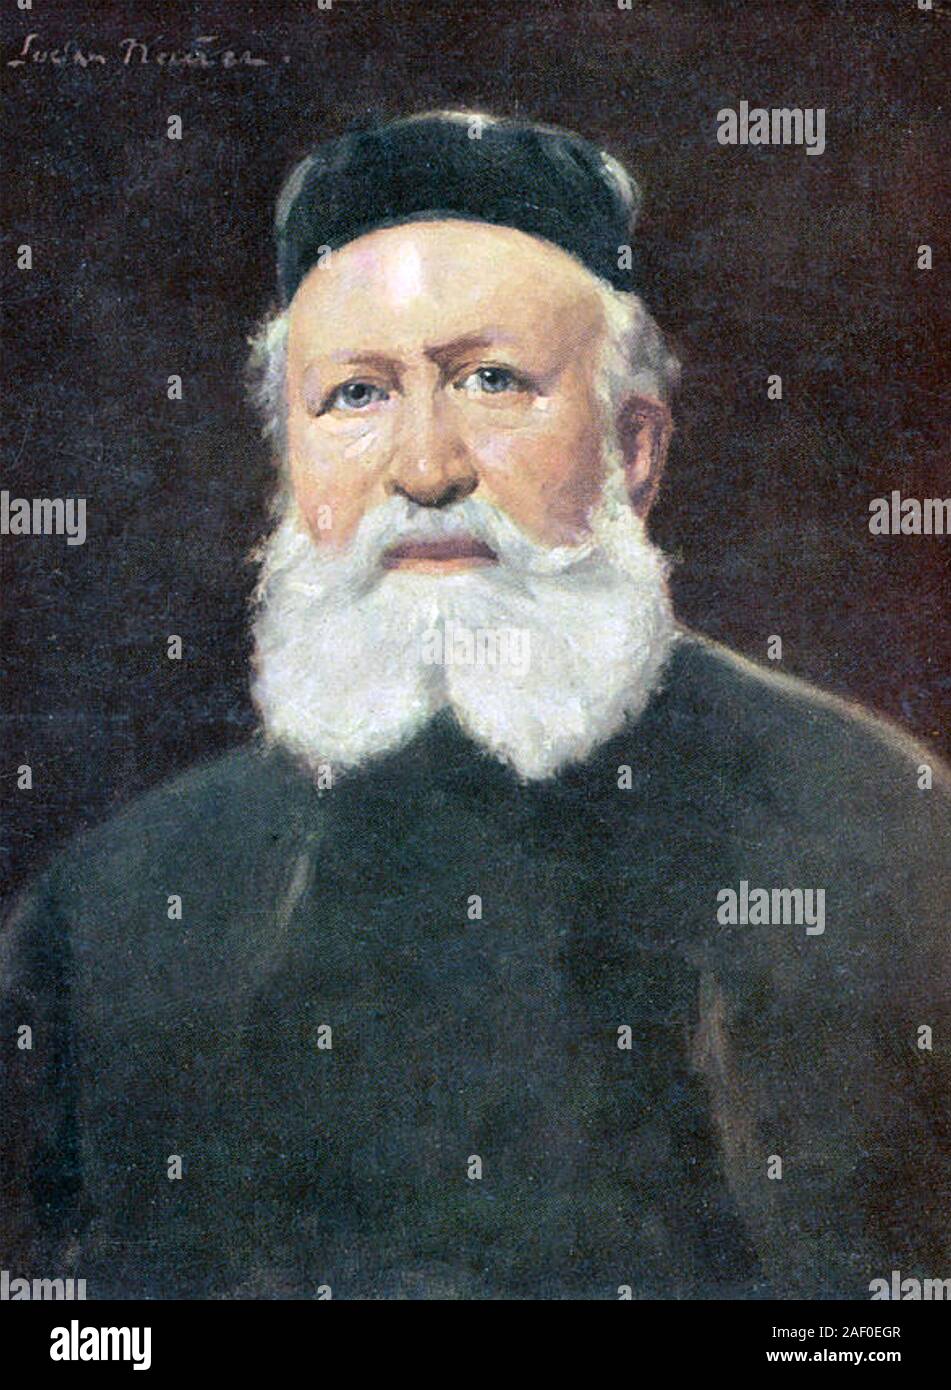 CHARLES GOUNOD (1818-1893) francese compositore operistico Foto Stock